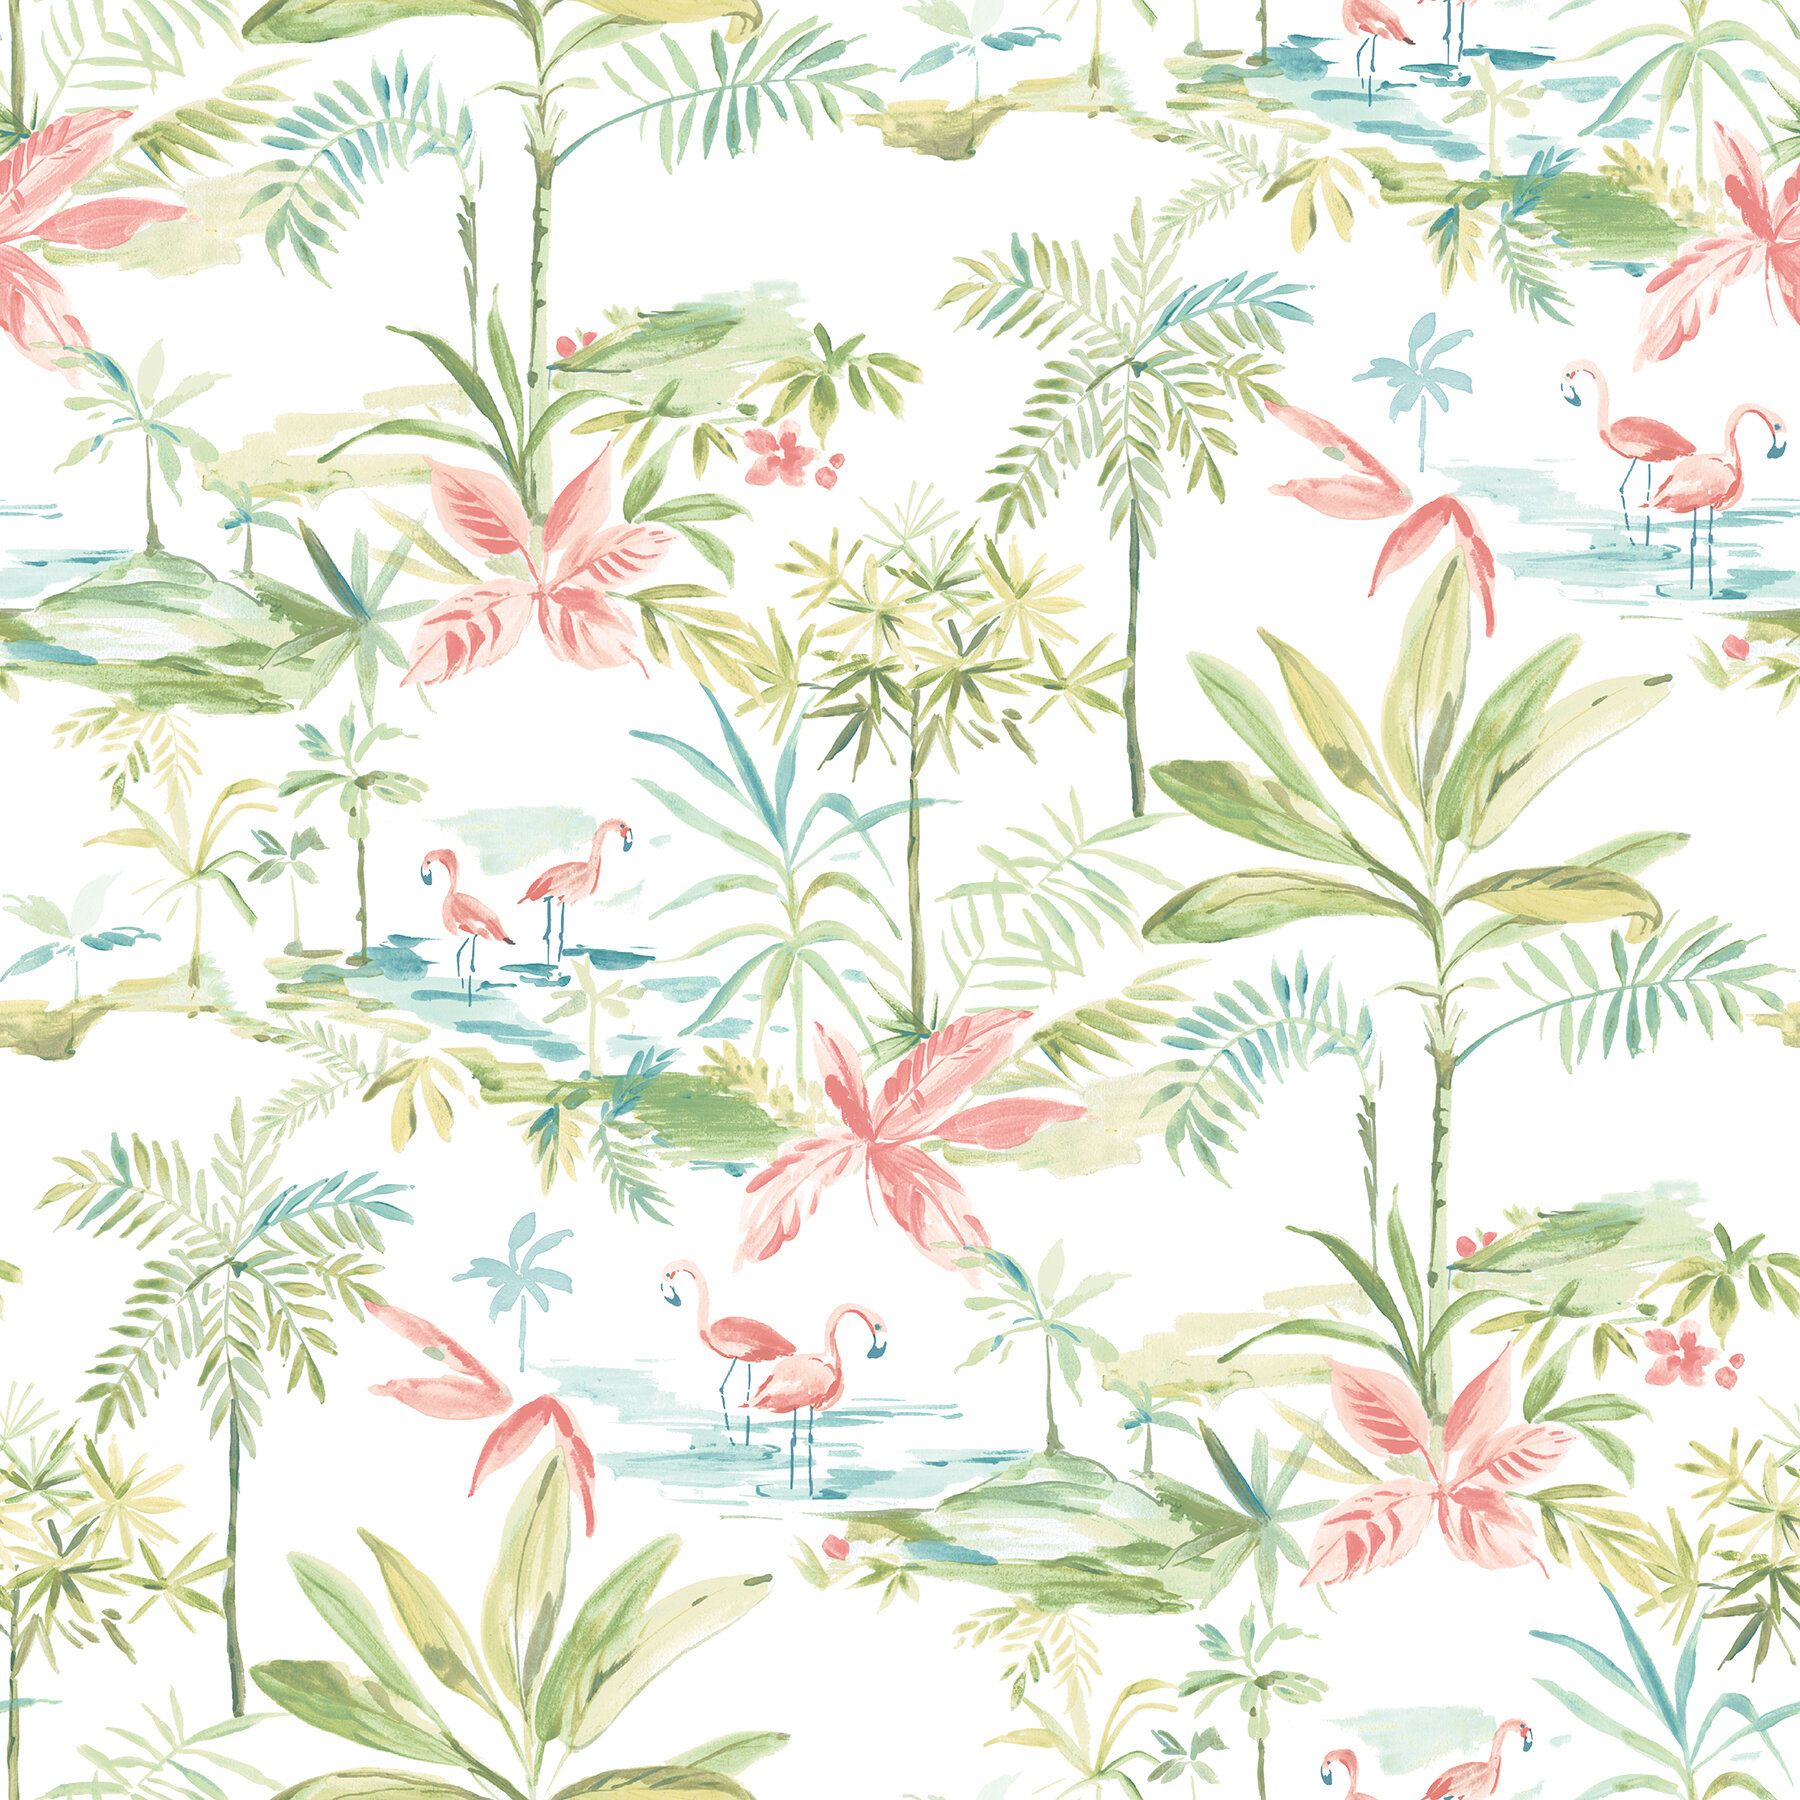 Flamingo jungle wallpaper by the peacock feather - Tropical, watercolor